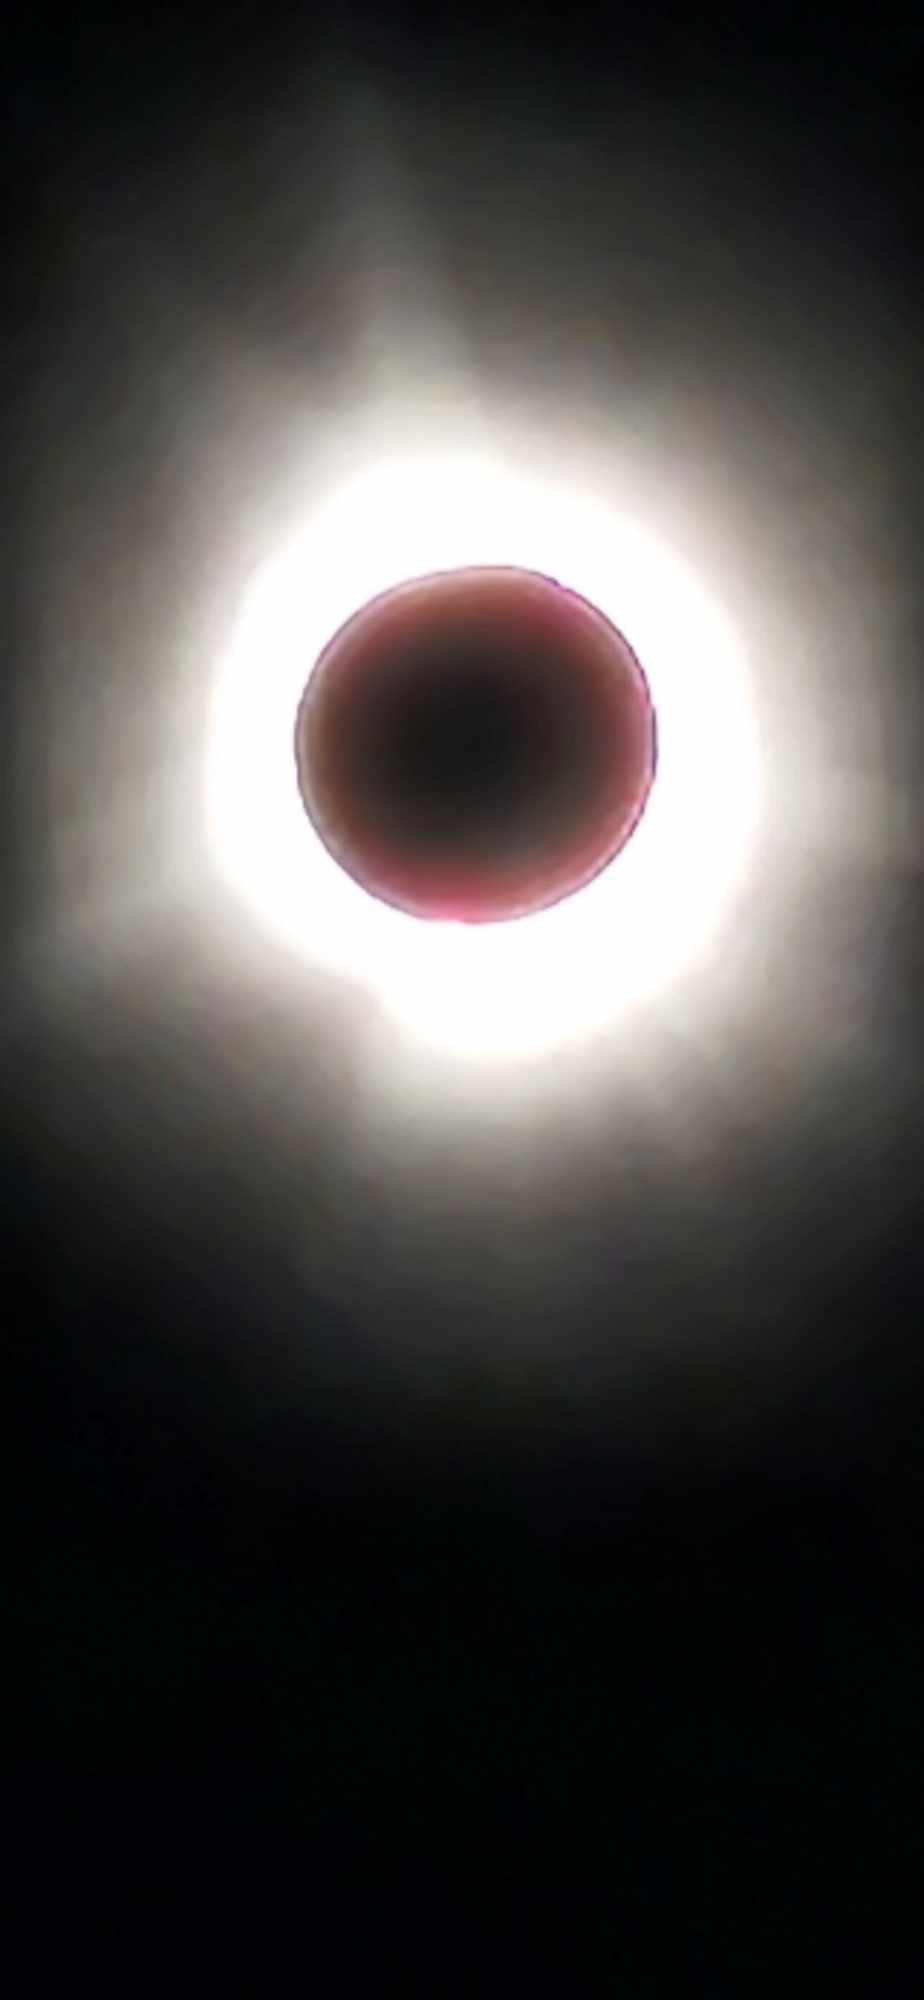 Photo of the eclipse